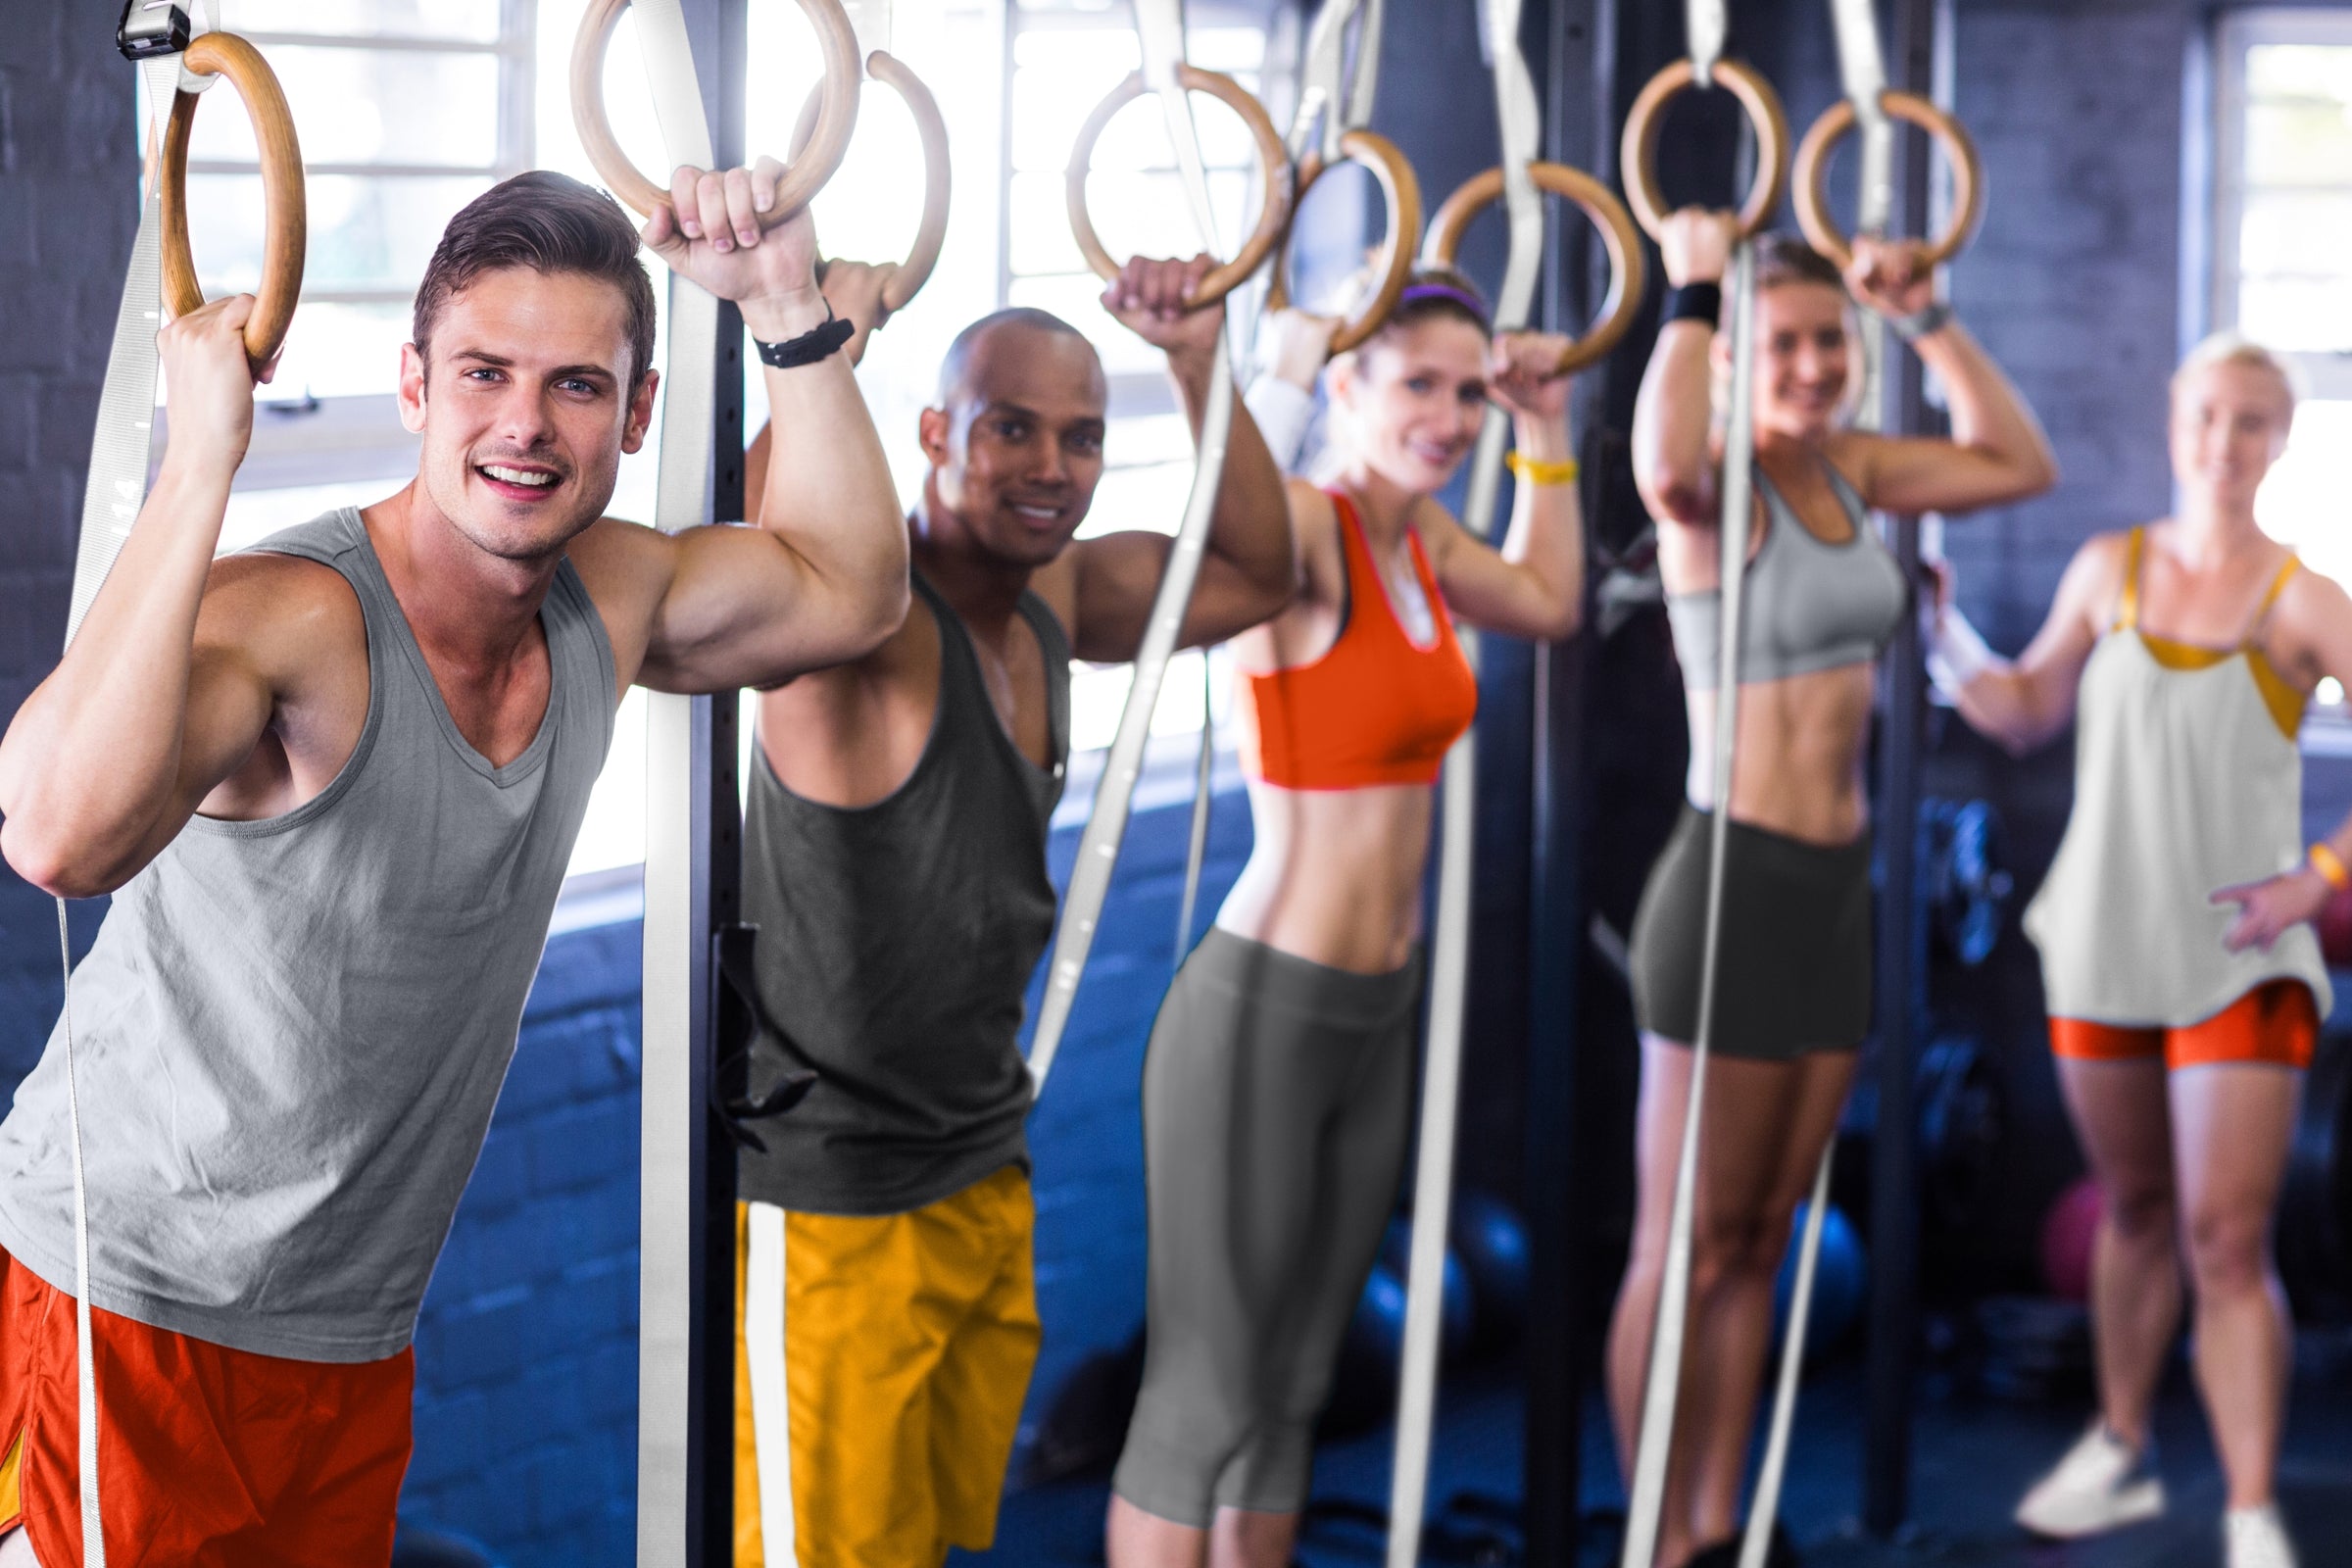 Men and women working out with wood gymnastic rings